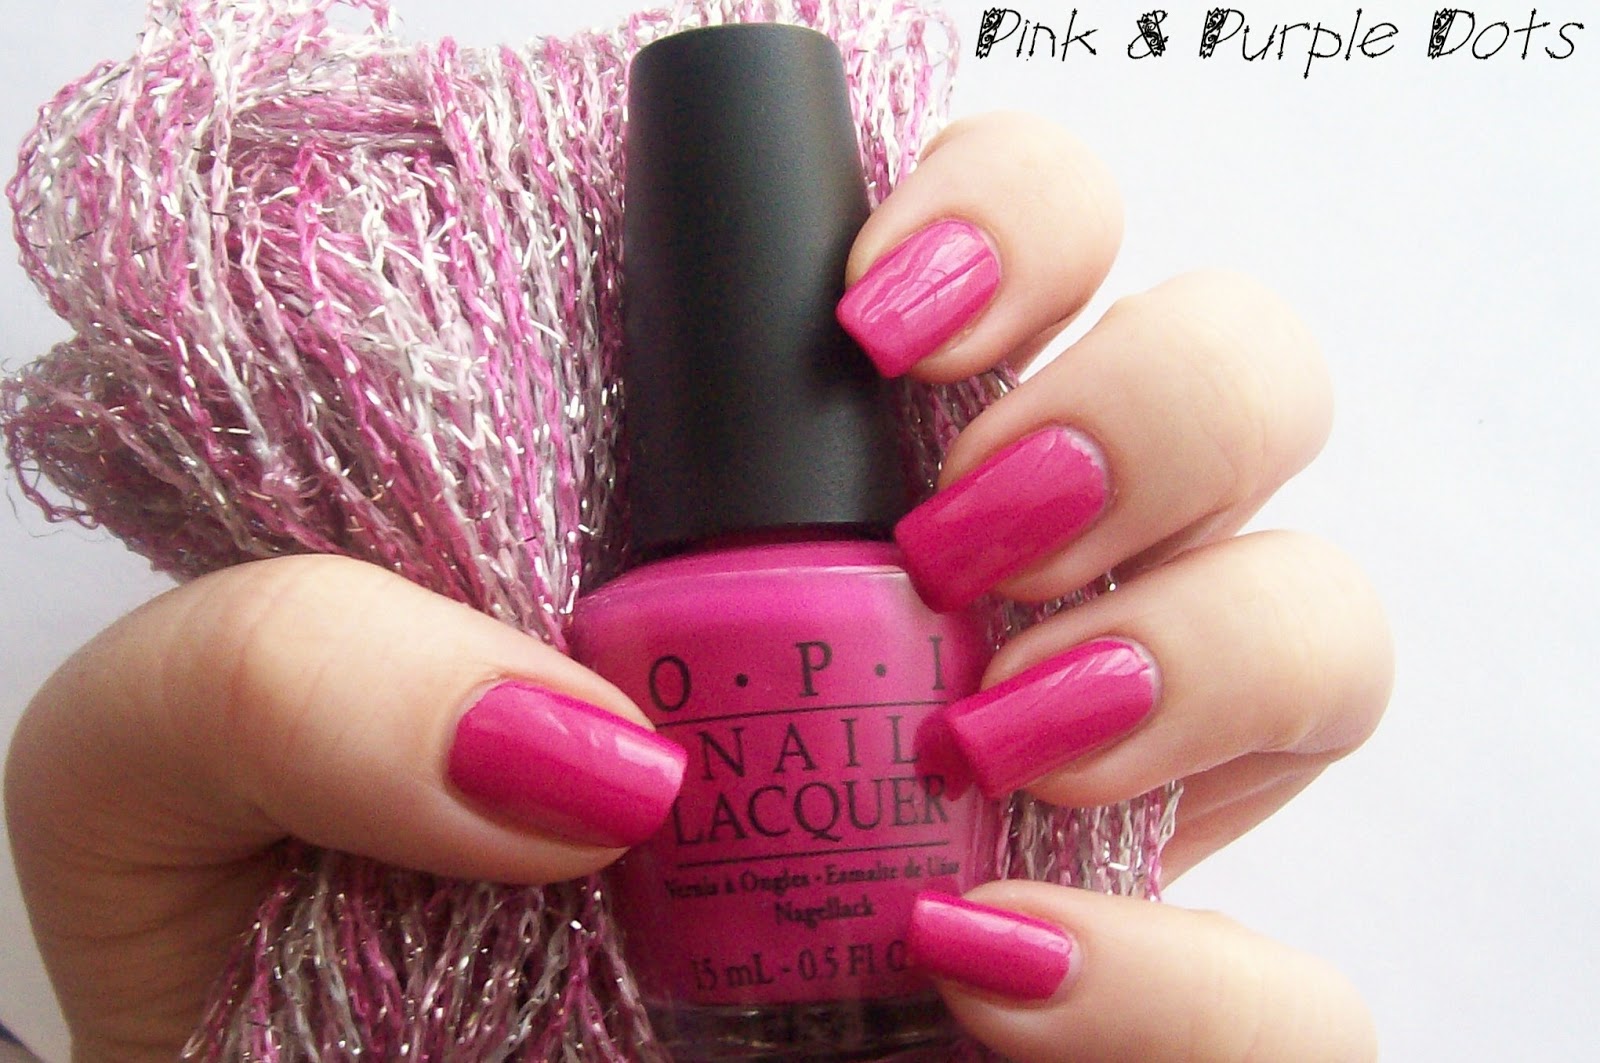 7. OPI Nail Lacquer in "Pink Flamenco" - wide 6